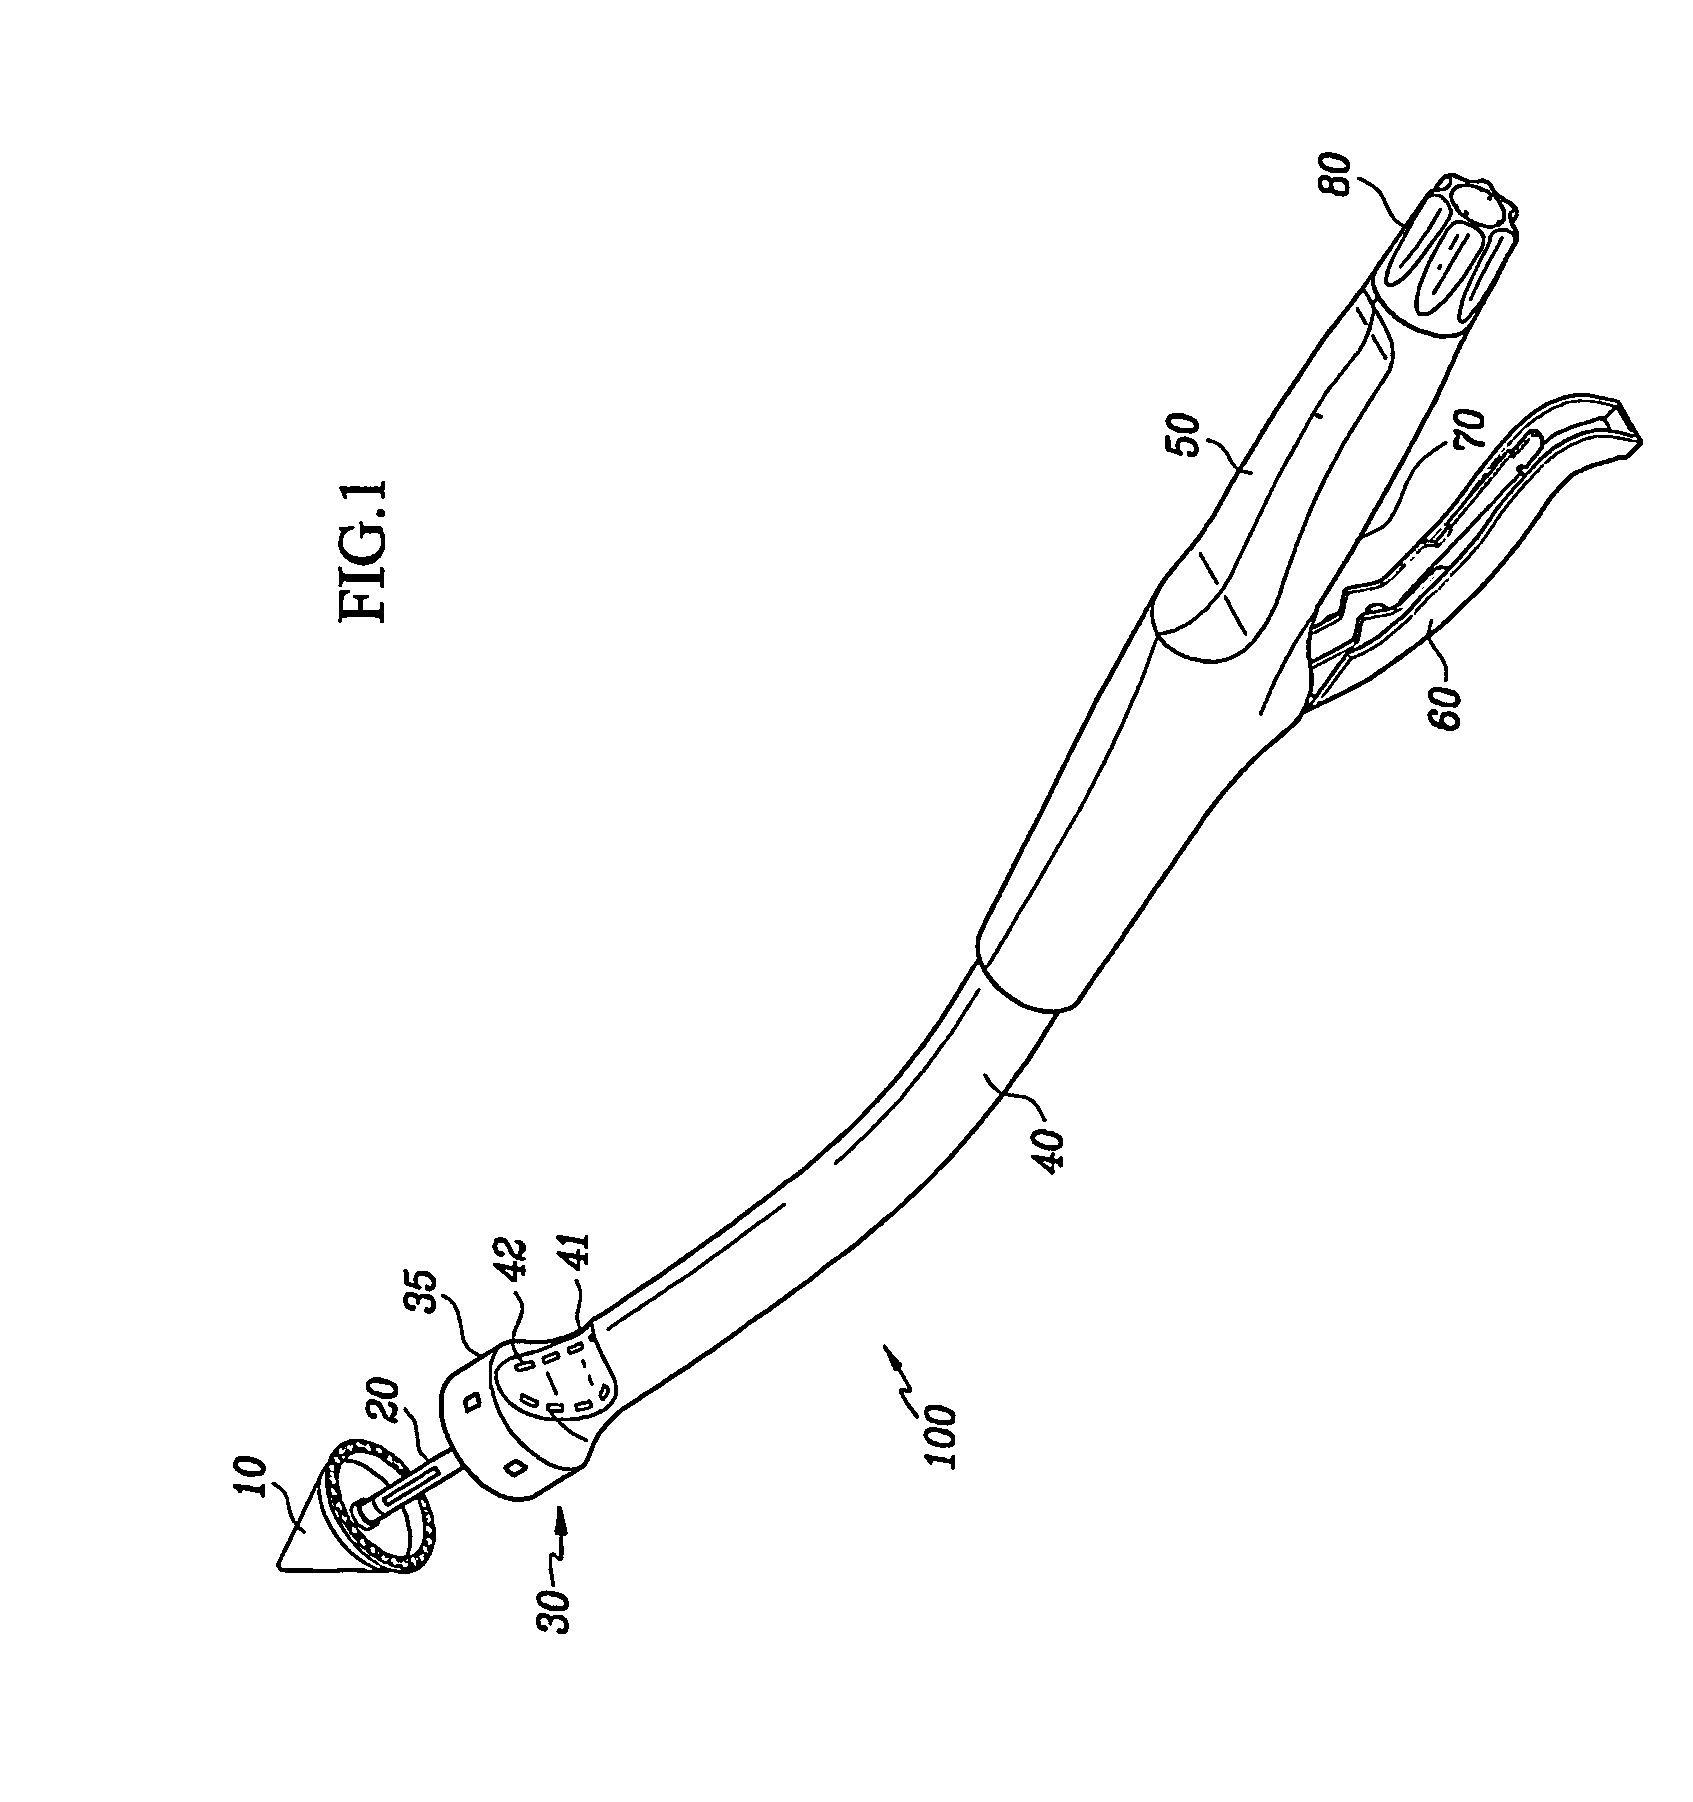 Circular surgical stapler with a detachable anvil